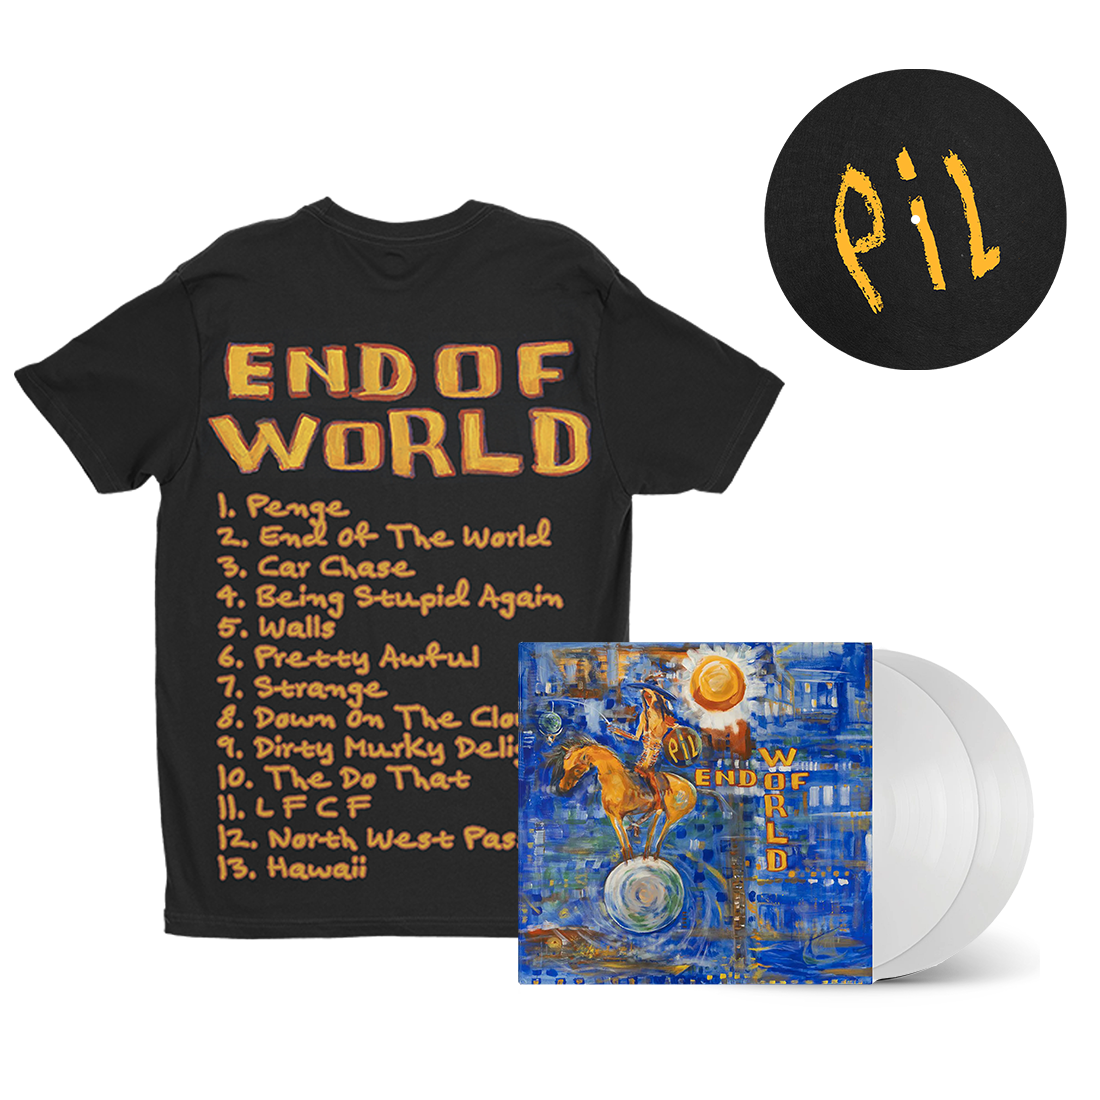 End Of World: Limited Solid White Vinyl 2LP + End of World Slipmat + End of World Tee I